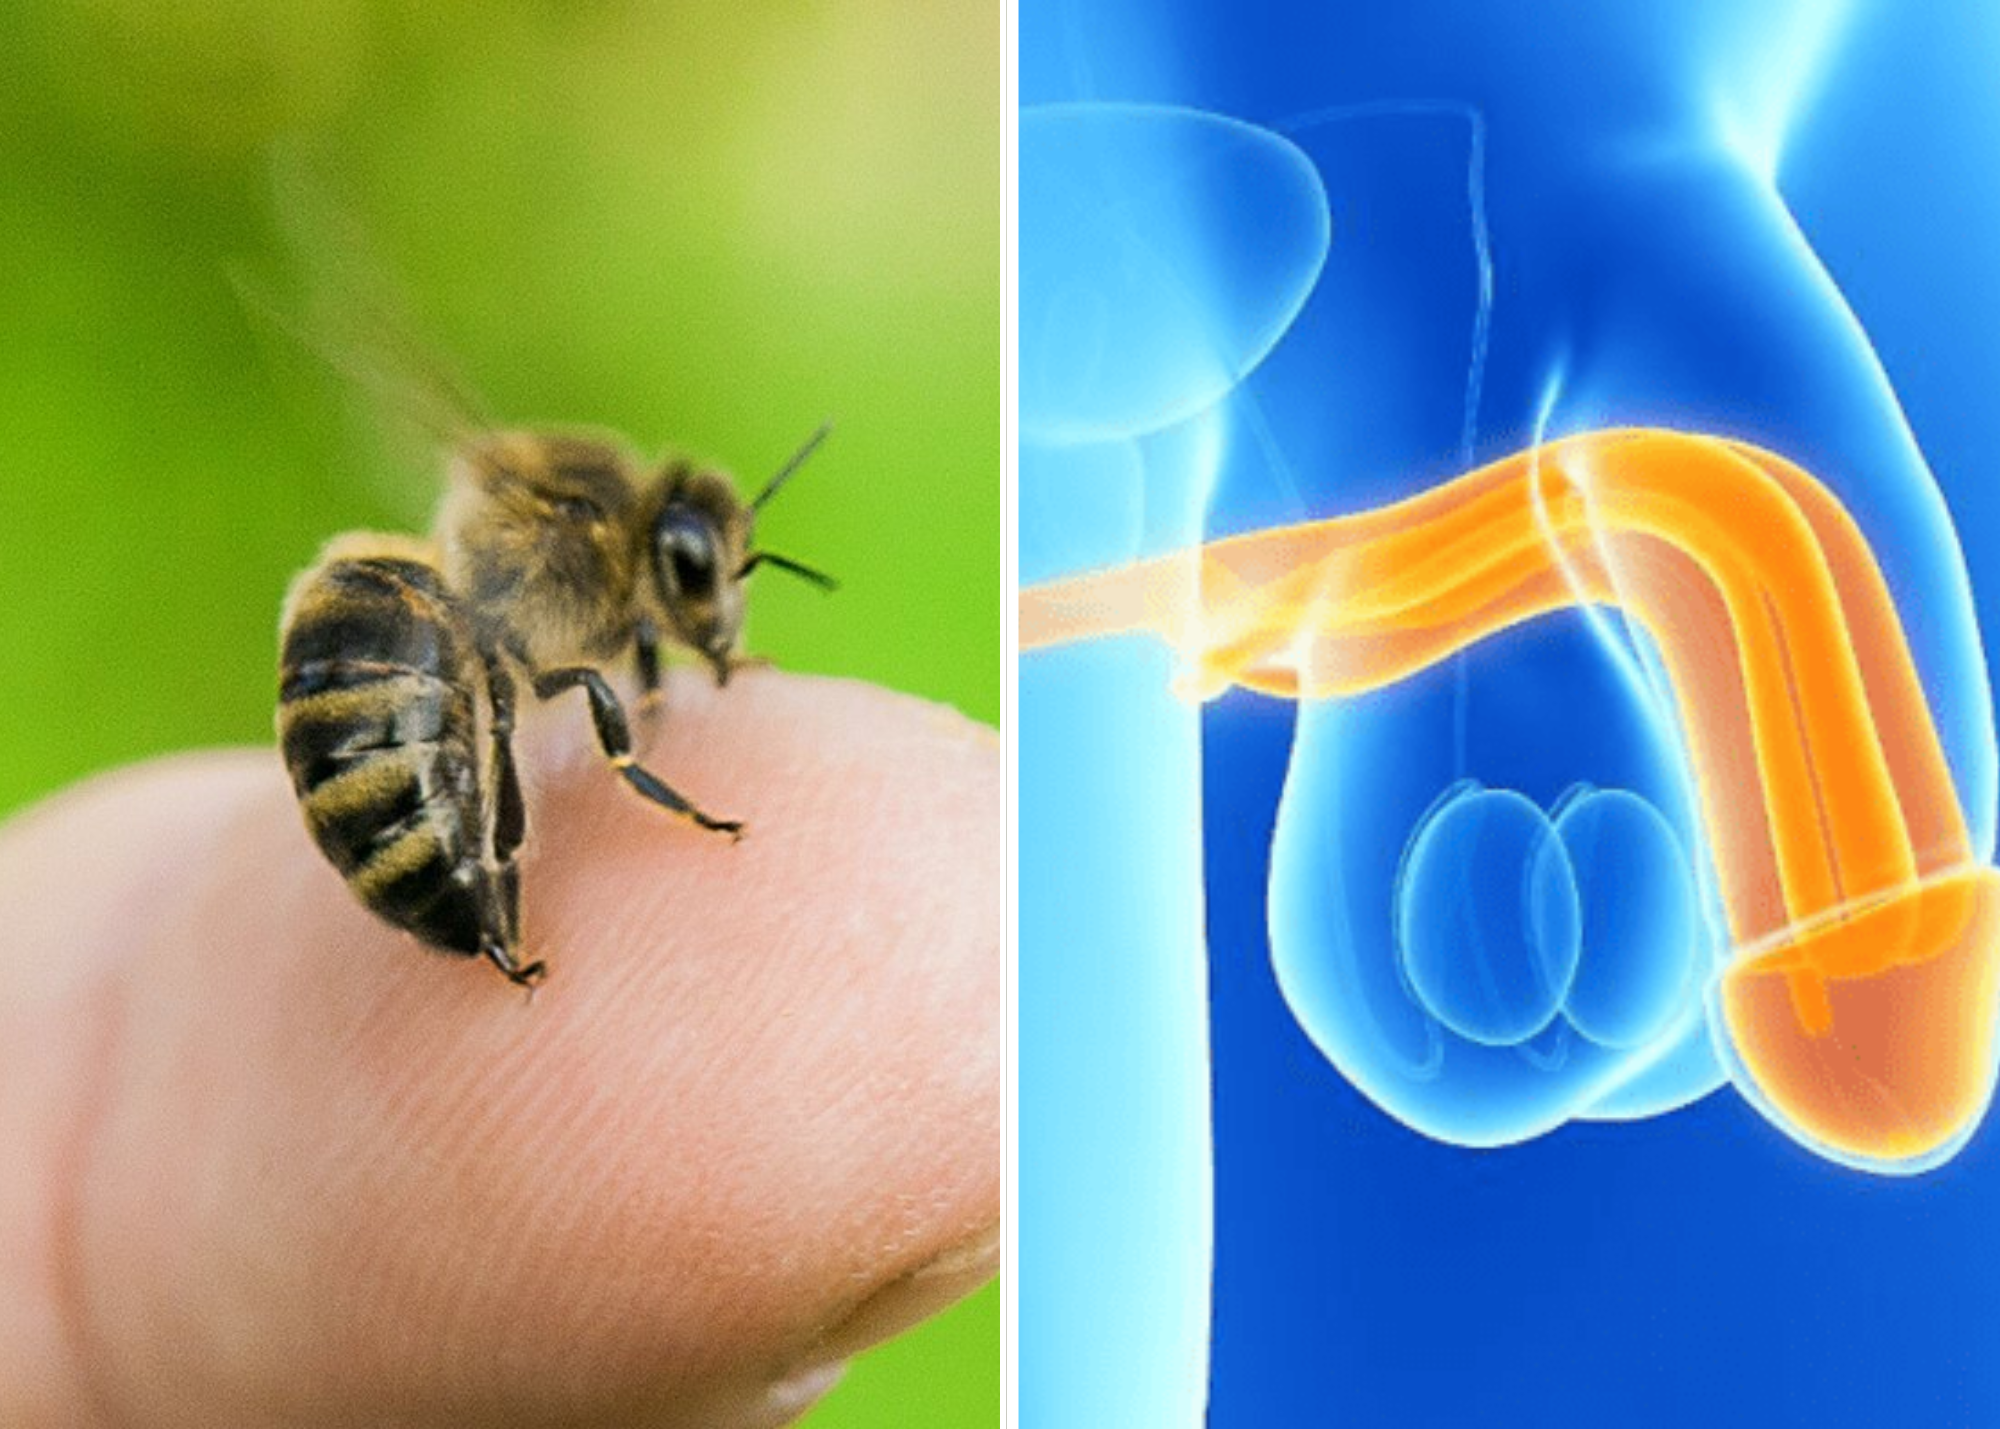 Bee Sting To The Penis Can Permanently Enlarge It - What Does The Research Say?